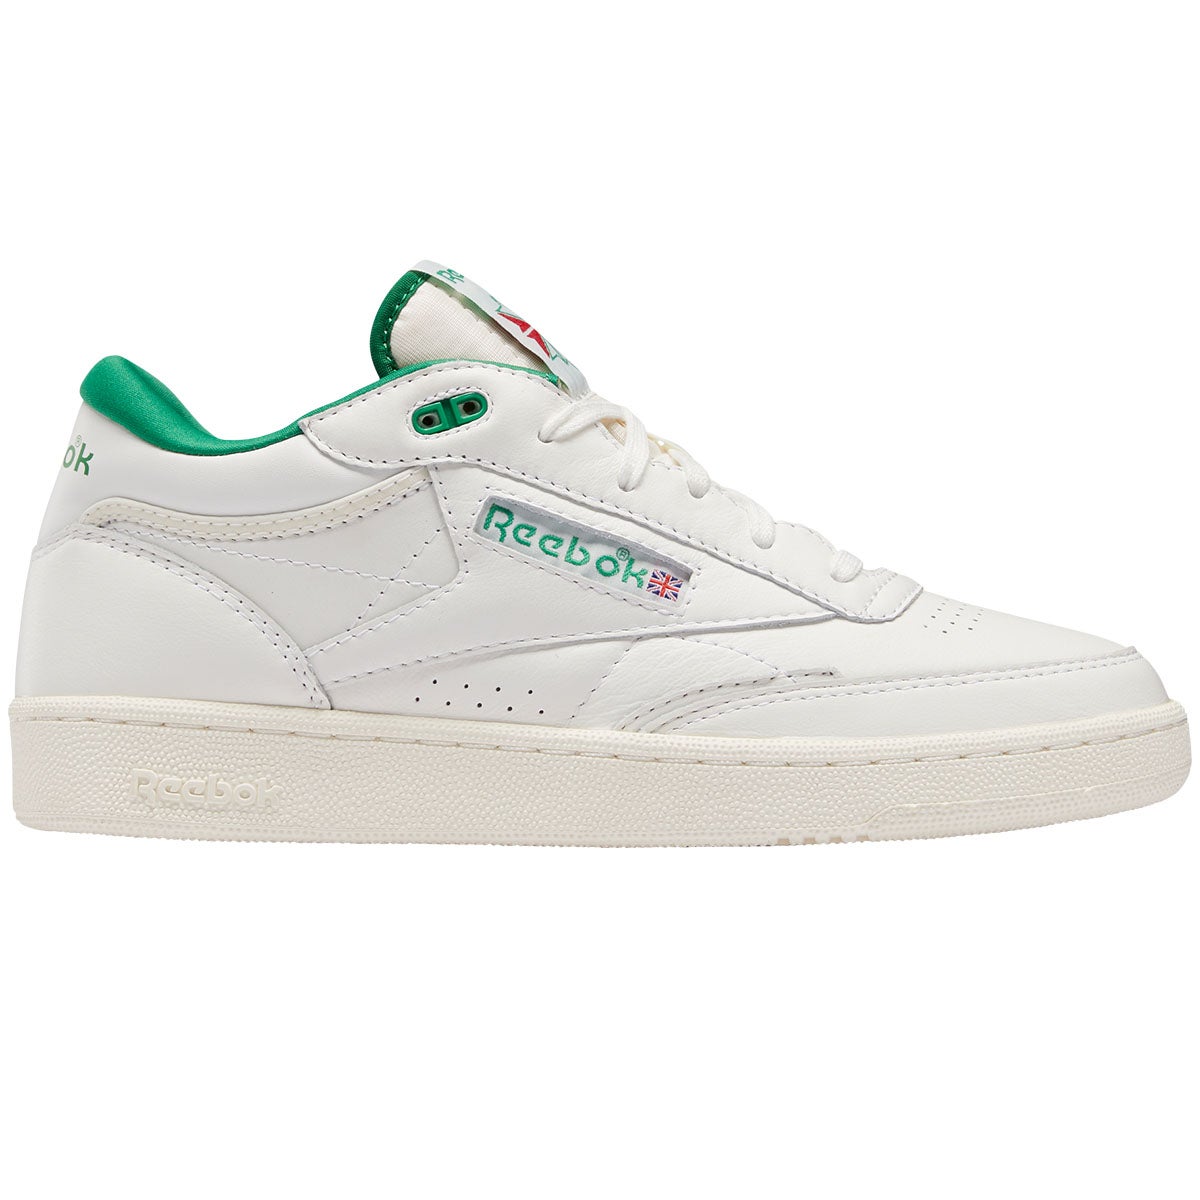 Reebok Club C Mid II vintage sneakers in white and red